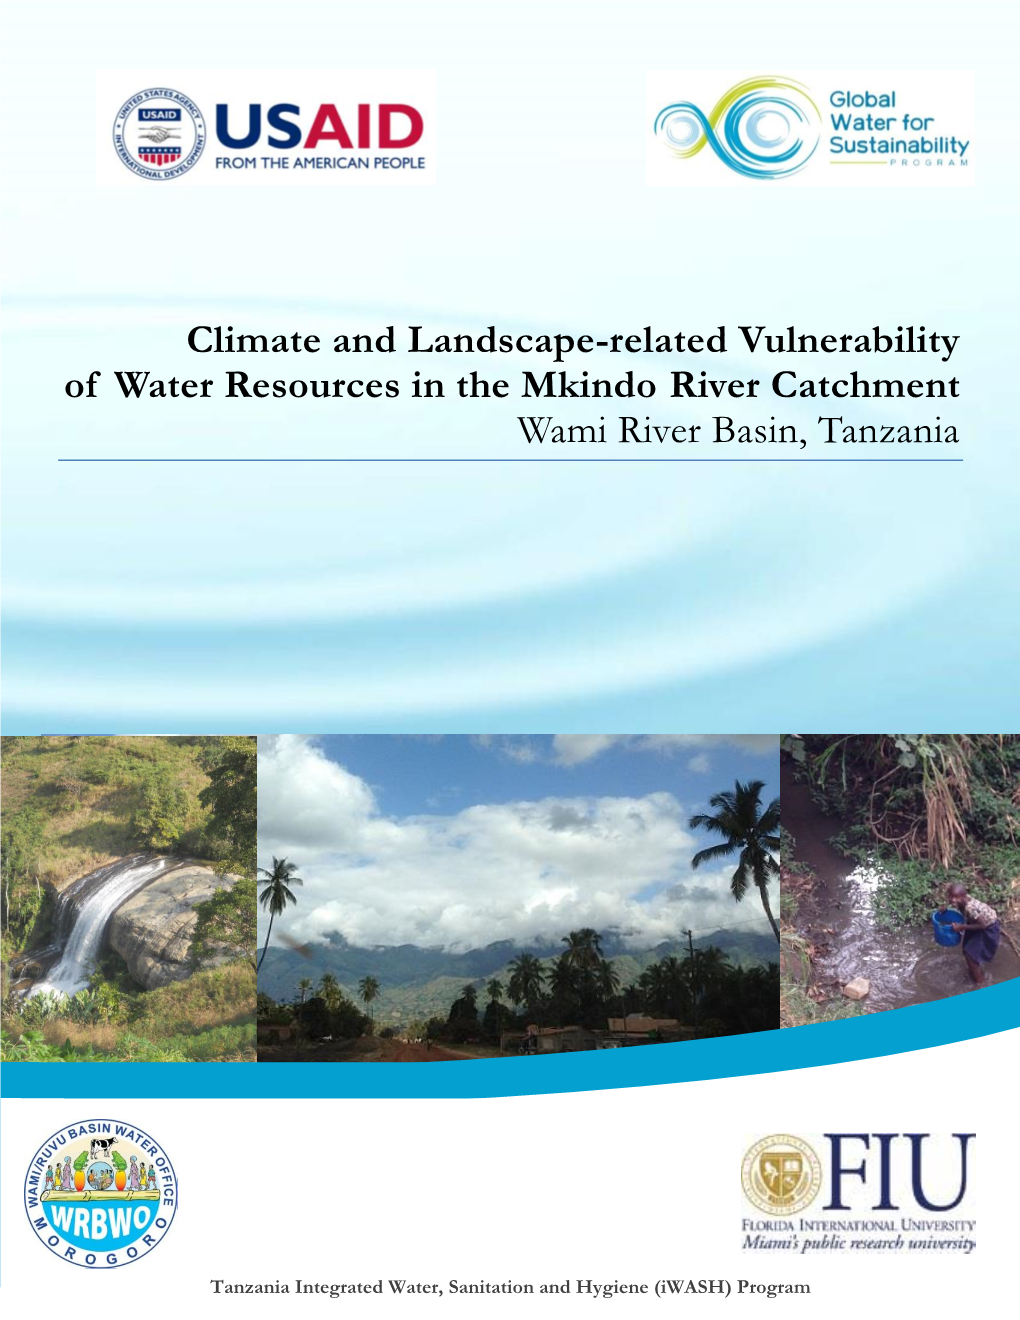 Climate, Forest Cover and Water Resources Vulnerability in the Mkindo River Catchment, Wami Basin, Tanzania